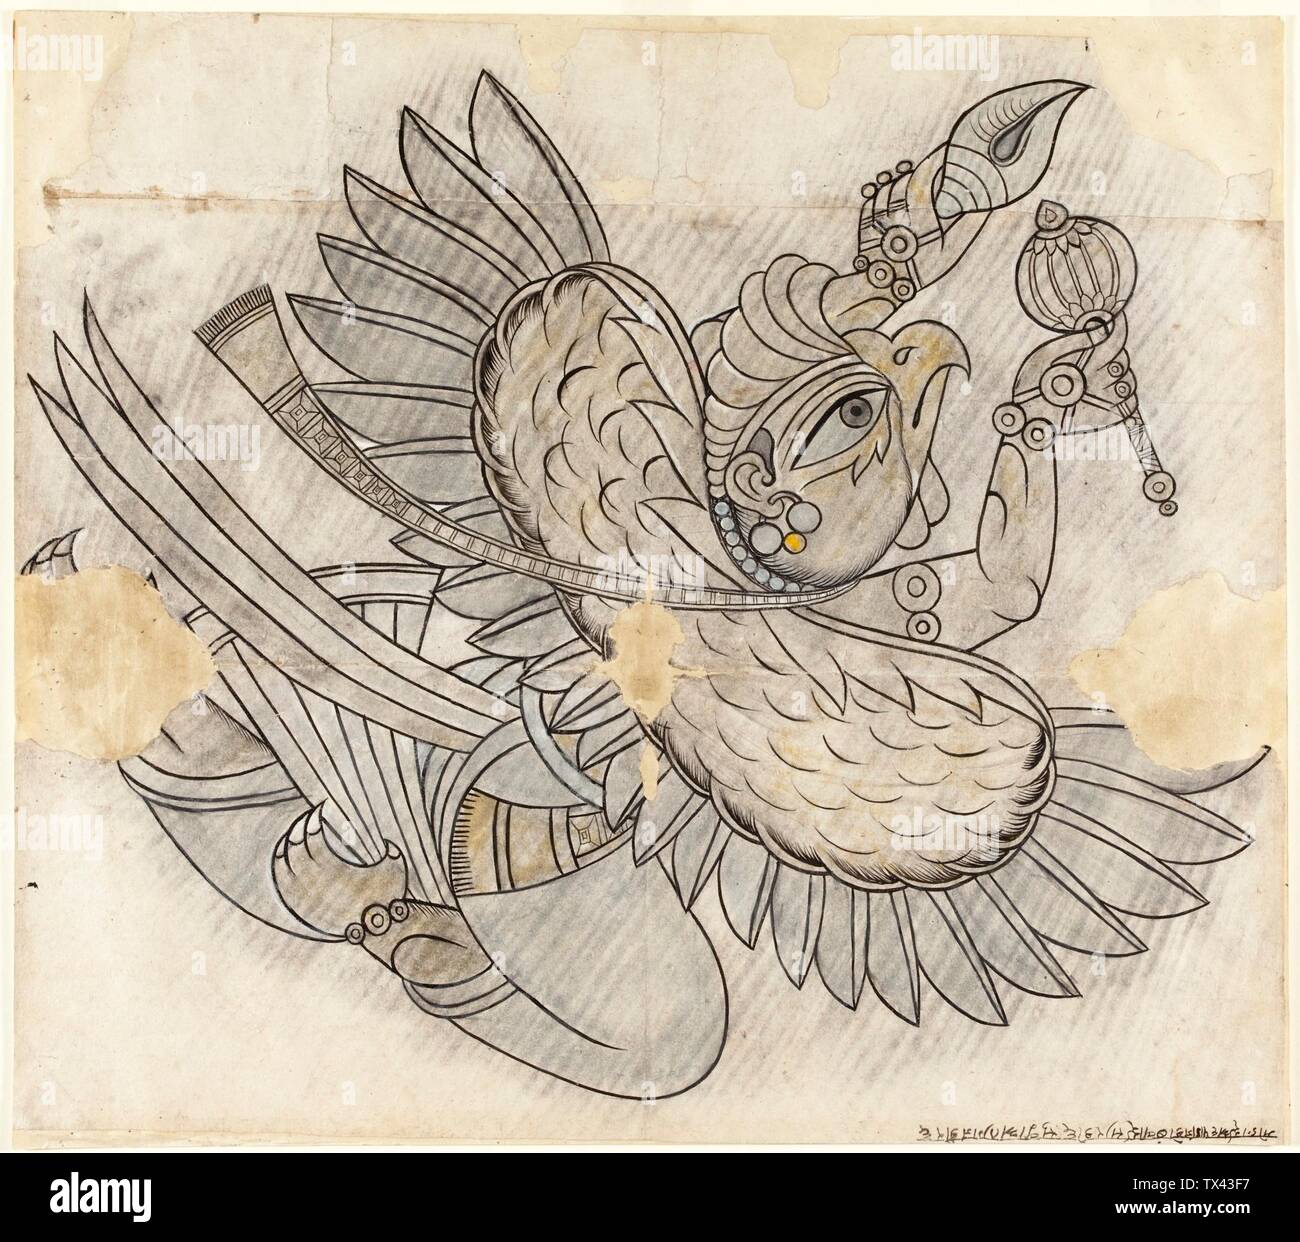 Garuda Flying through the Air (image 1 of 3);  India, Rajasthan, Bundi, circa 1750-1775 Drawings Ink and opaque watercolor on paper 24 1/4 x 27 3/8 in. (61.59 x 69.53 cm) Gift of Paul F. Walter (M.79.191.24) South and Southeast Asian Art; between circa 1750 and circa 1775 date QS:P571,+1750-00-00T00:00:00Z/7,P1319,+1750-00-00T00:00:00Z/9,P1326,+1775-00-00T00:00:00Z/9,P1480,Q5727902; Stock Photo